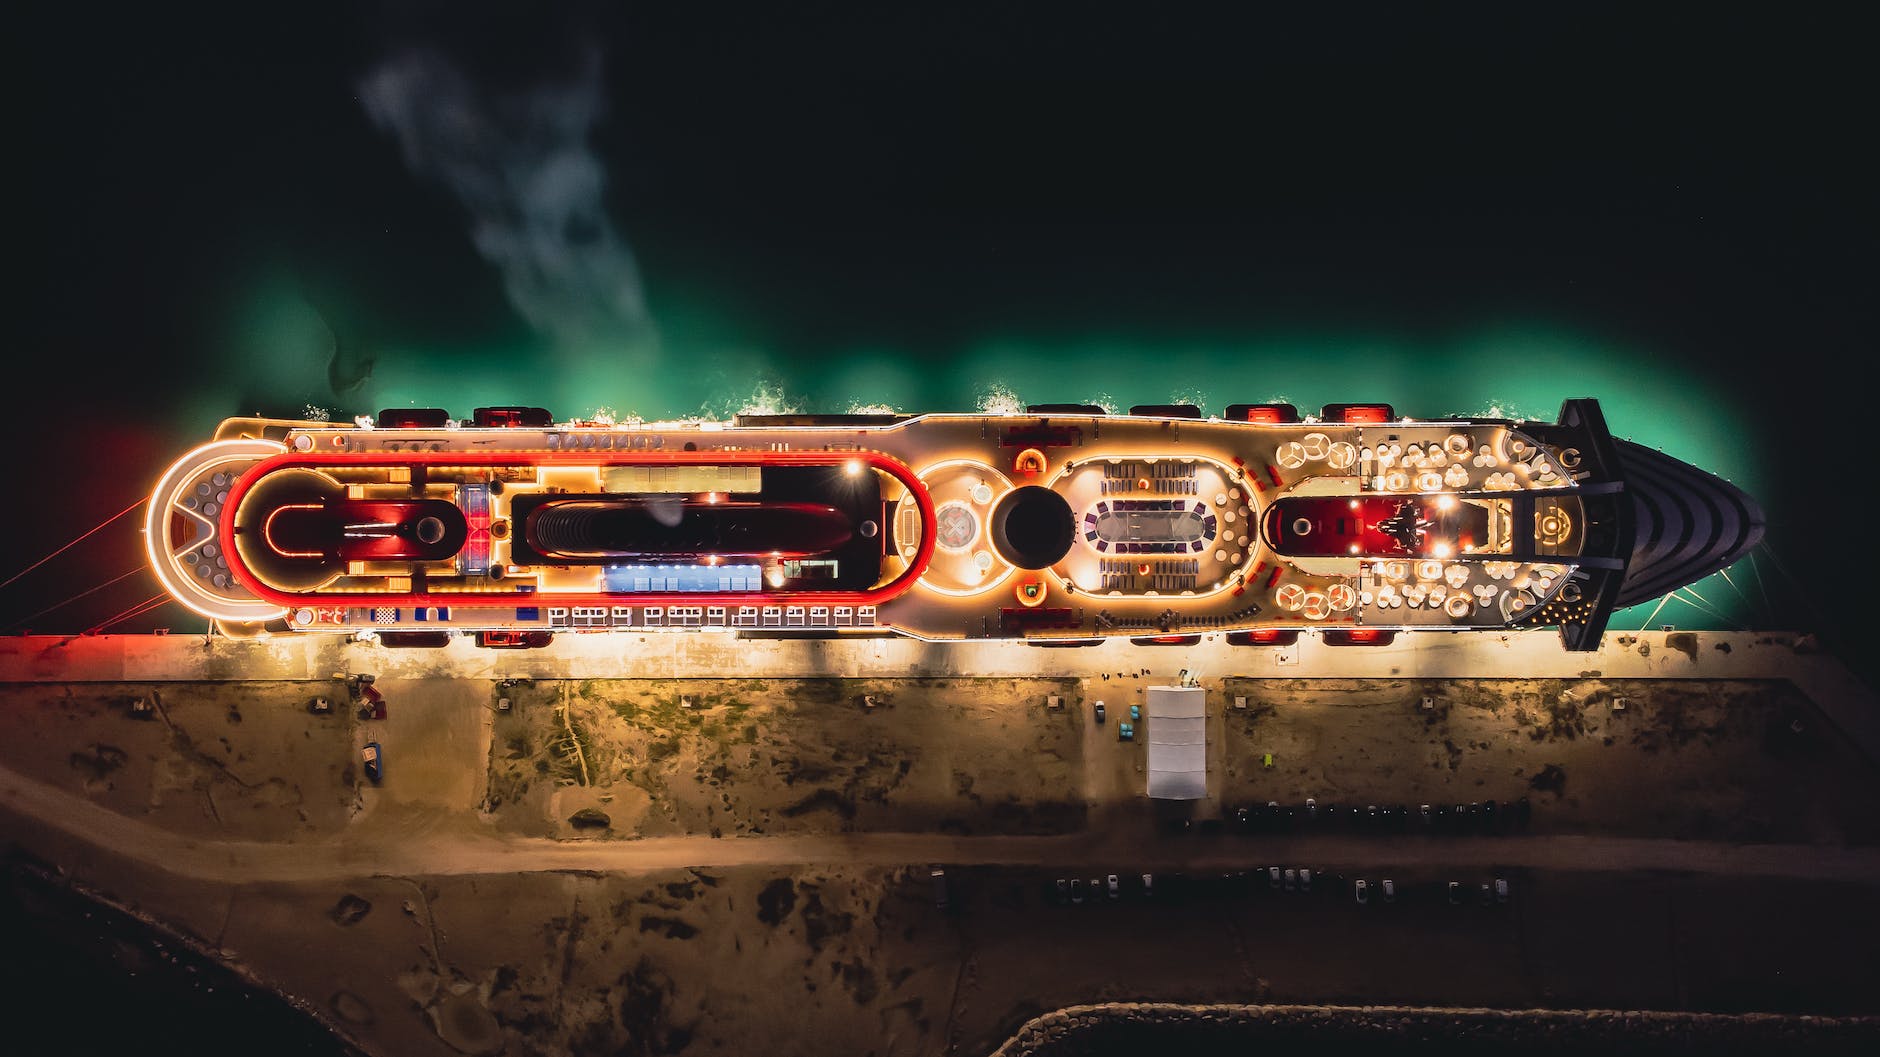 top view of an illuminated cruise ship in a dock at night